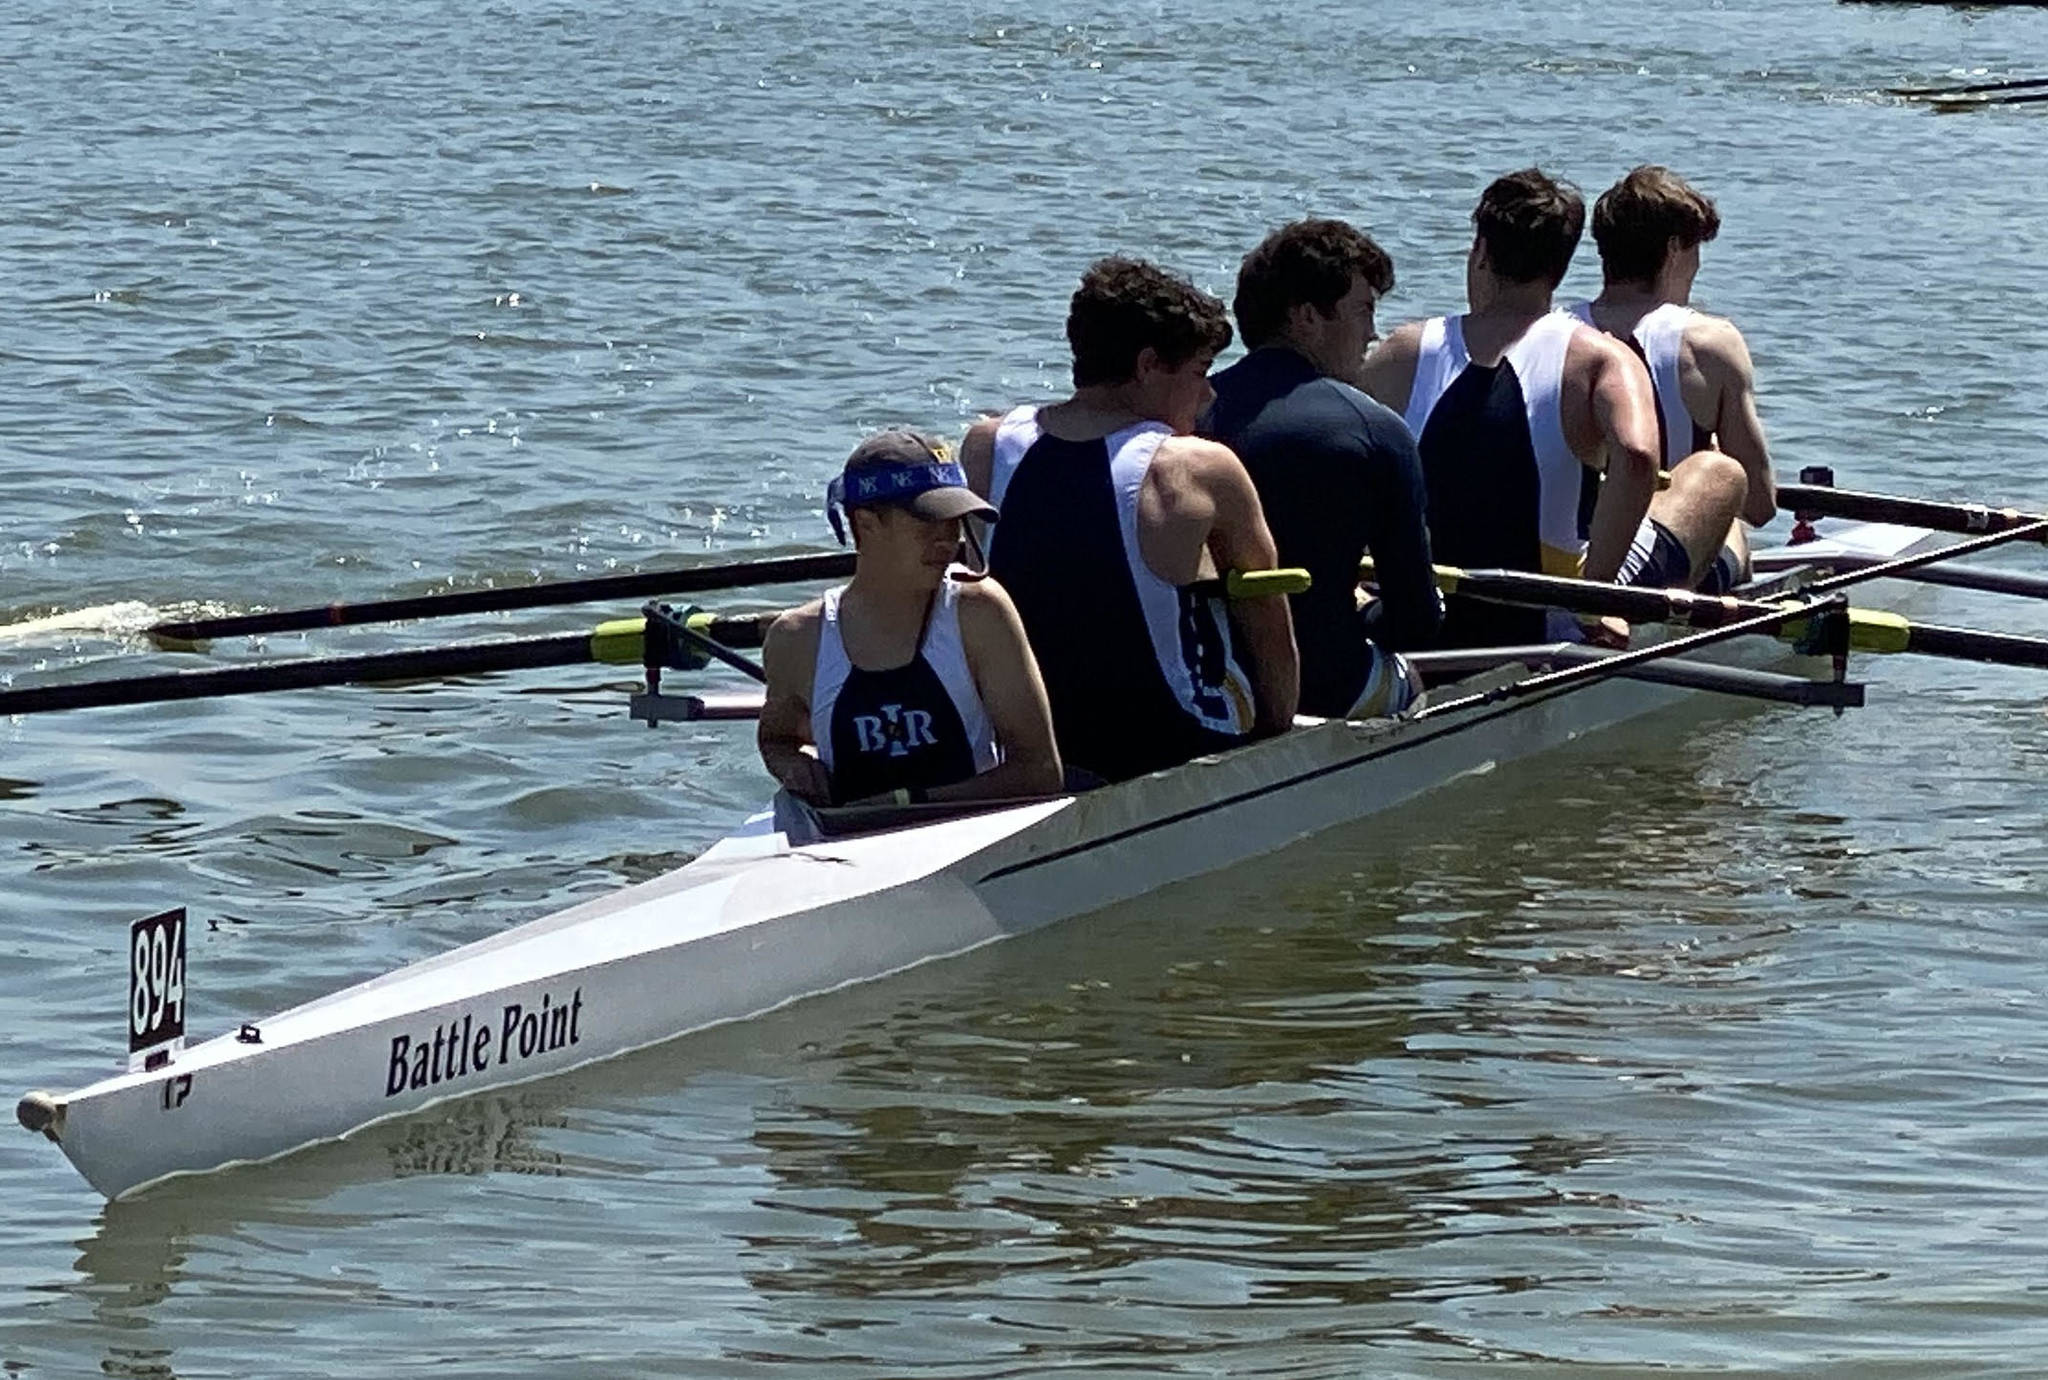 Coxswain Tanner Reightley prepares Owen Sykes, William Taylor, Aidan Driggers, Hugo Pizarro for their race. (Contributed photo)